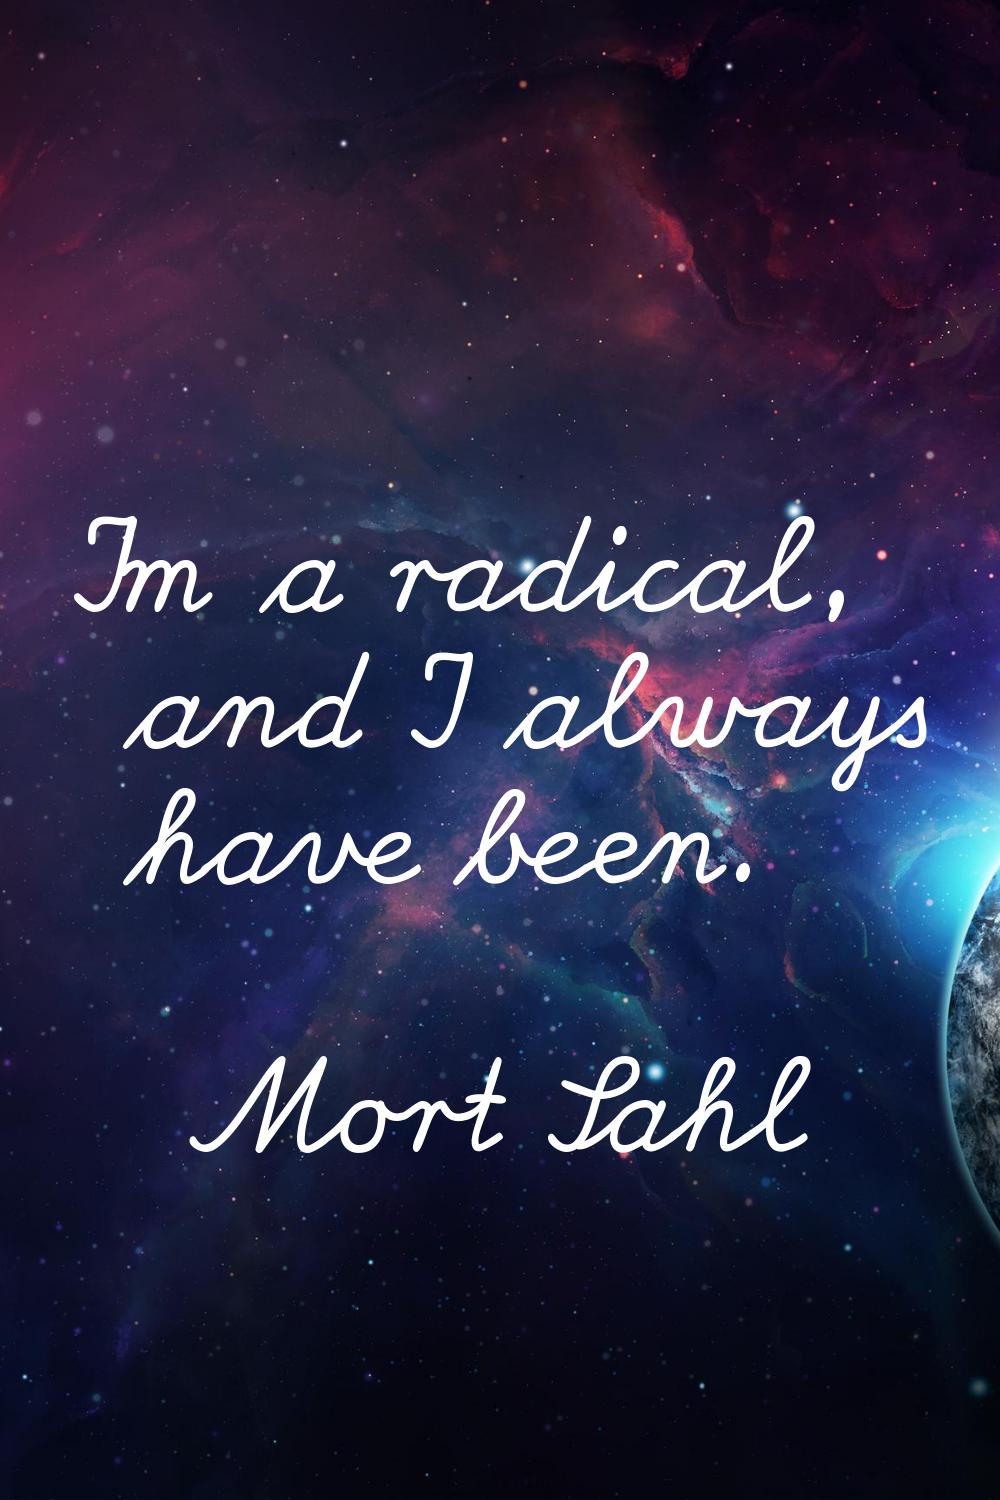 I'm a radical, and I always have been.